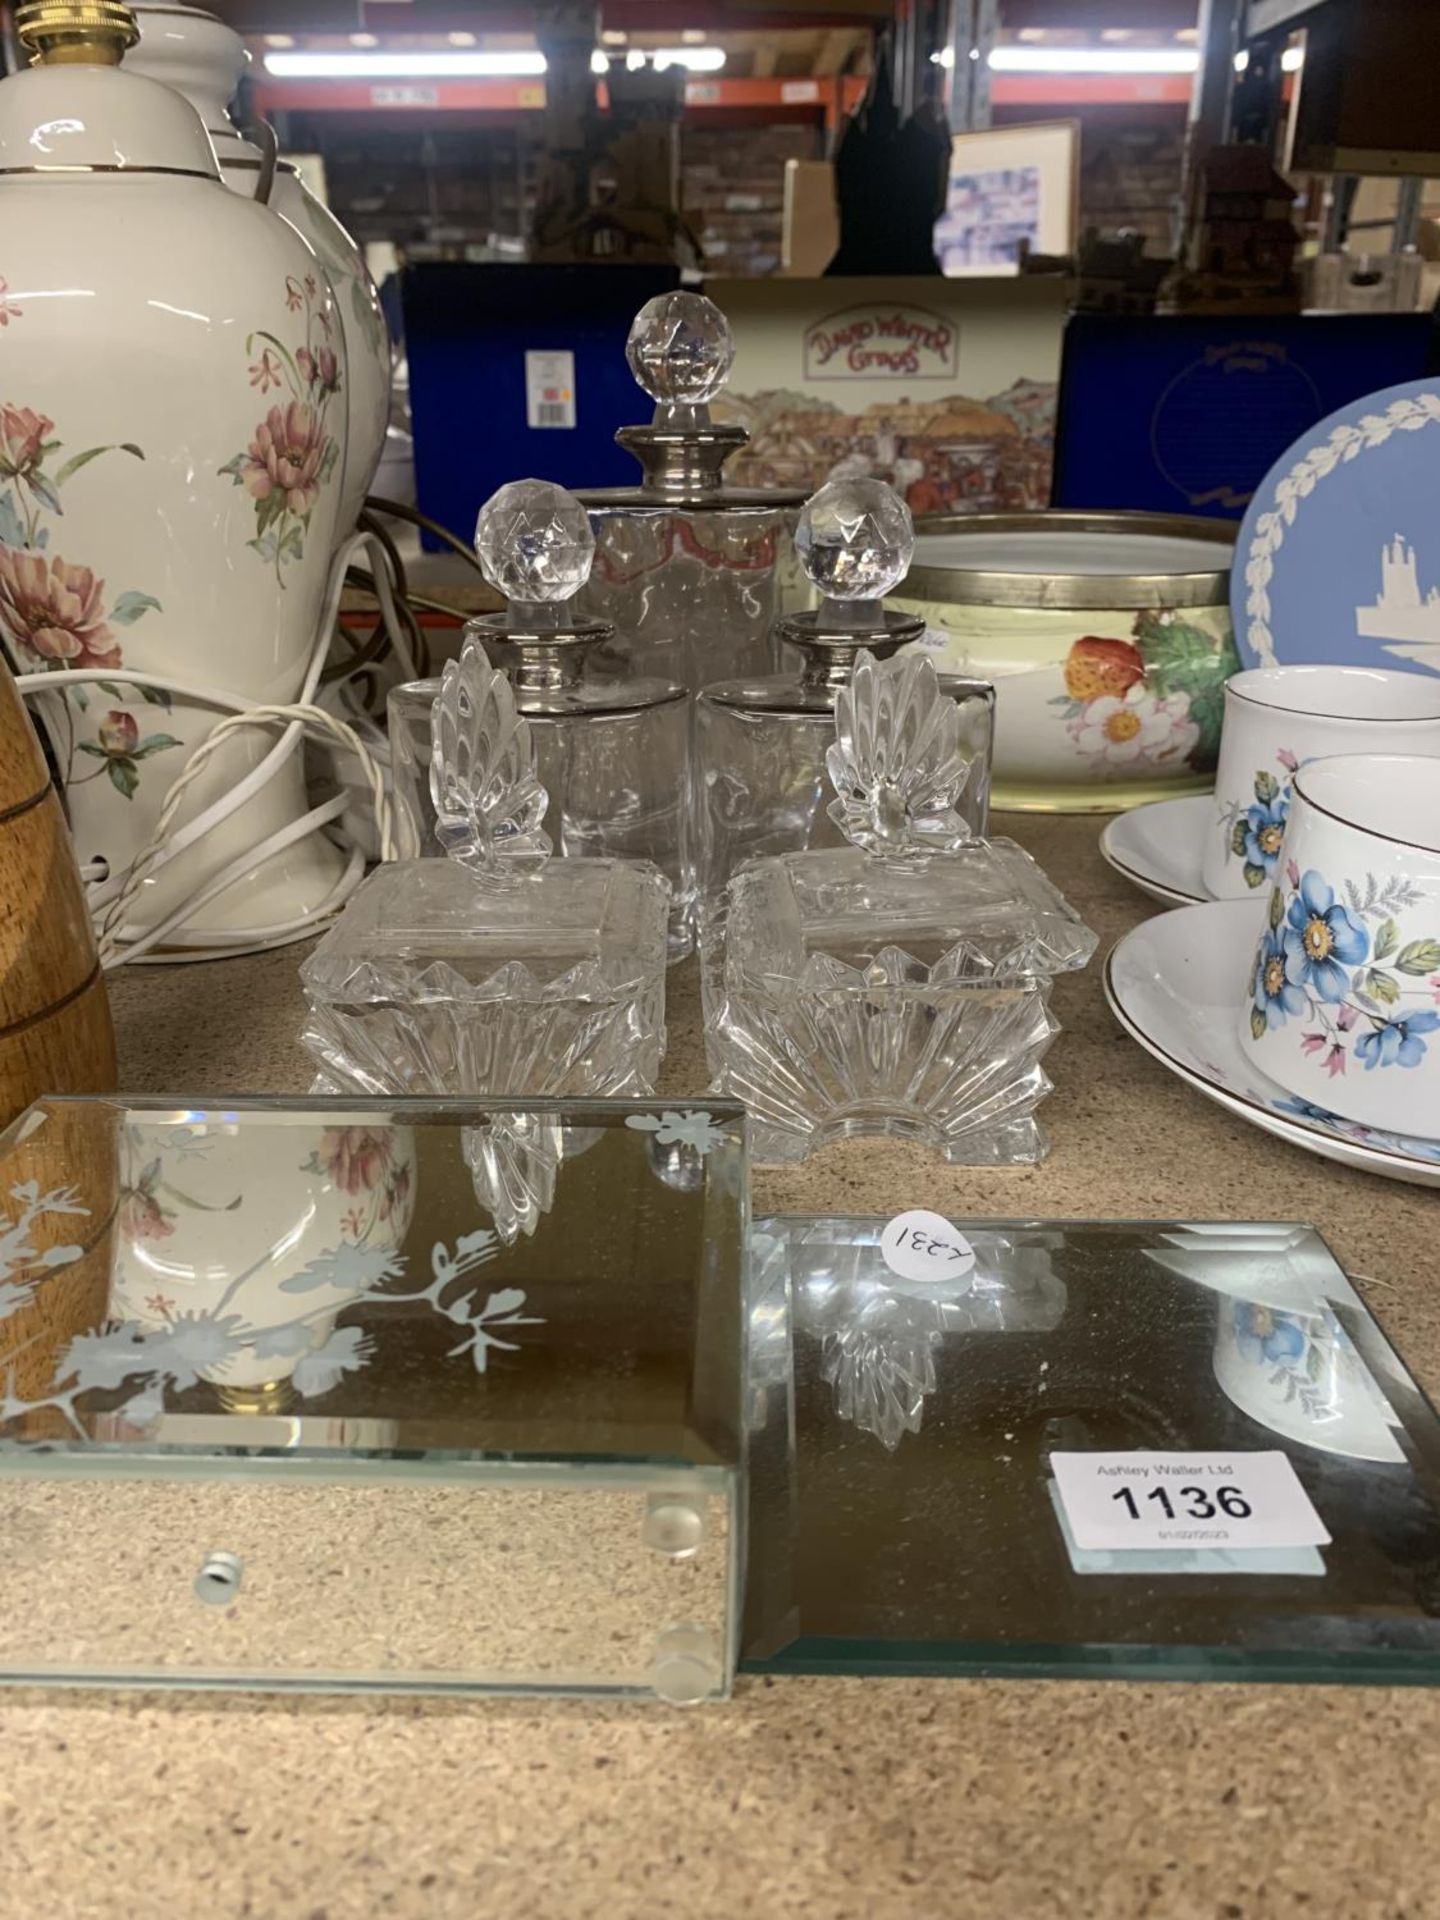 THREE GLASS DECANTERS, TRINKET BOXES, MIRRORED FLOWER HOLDER, ETC